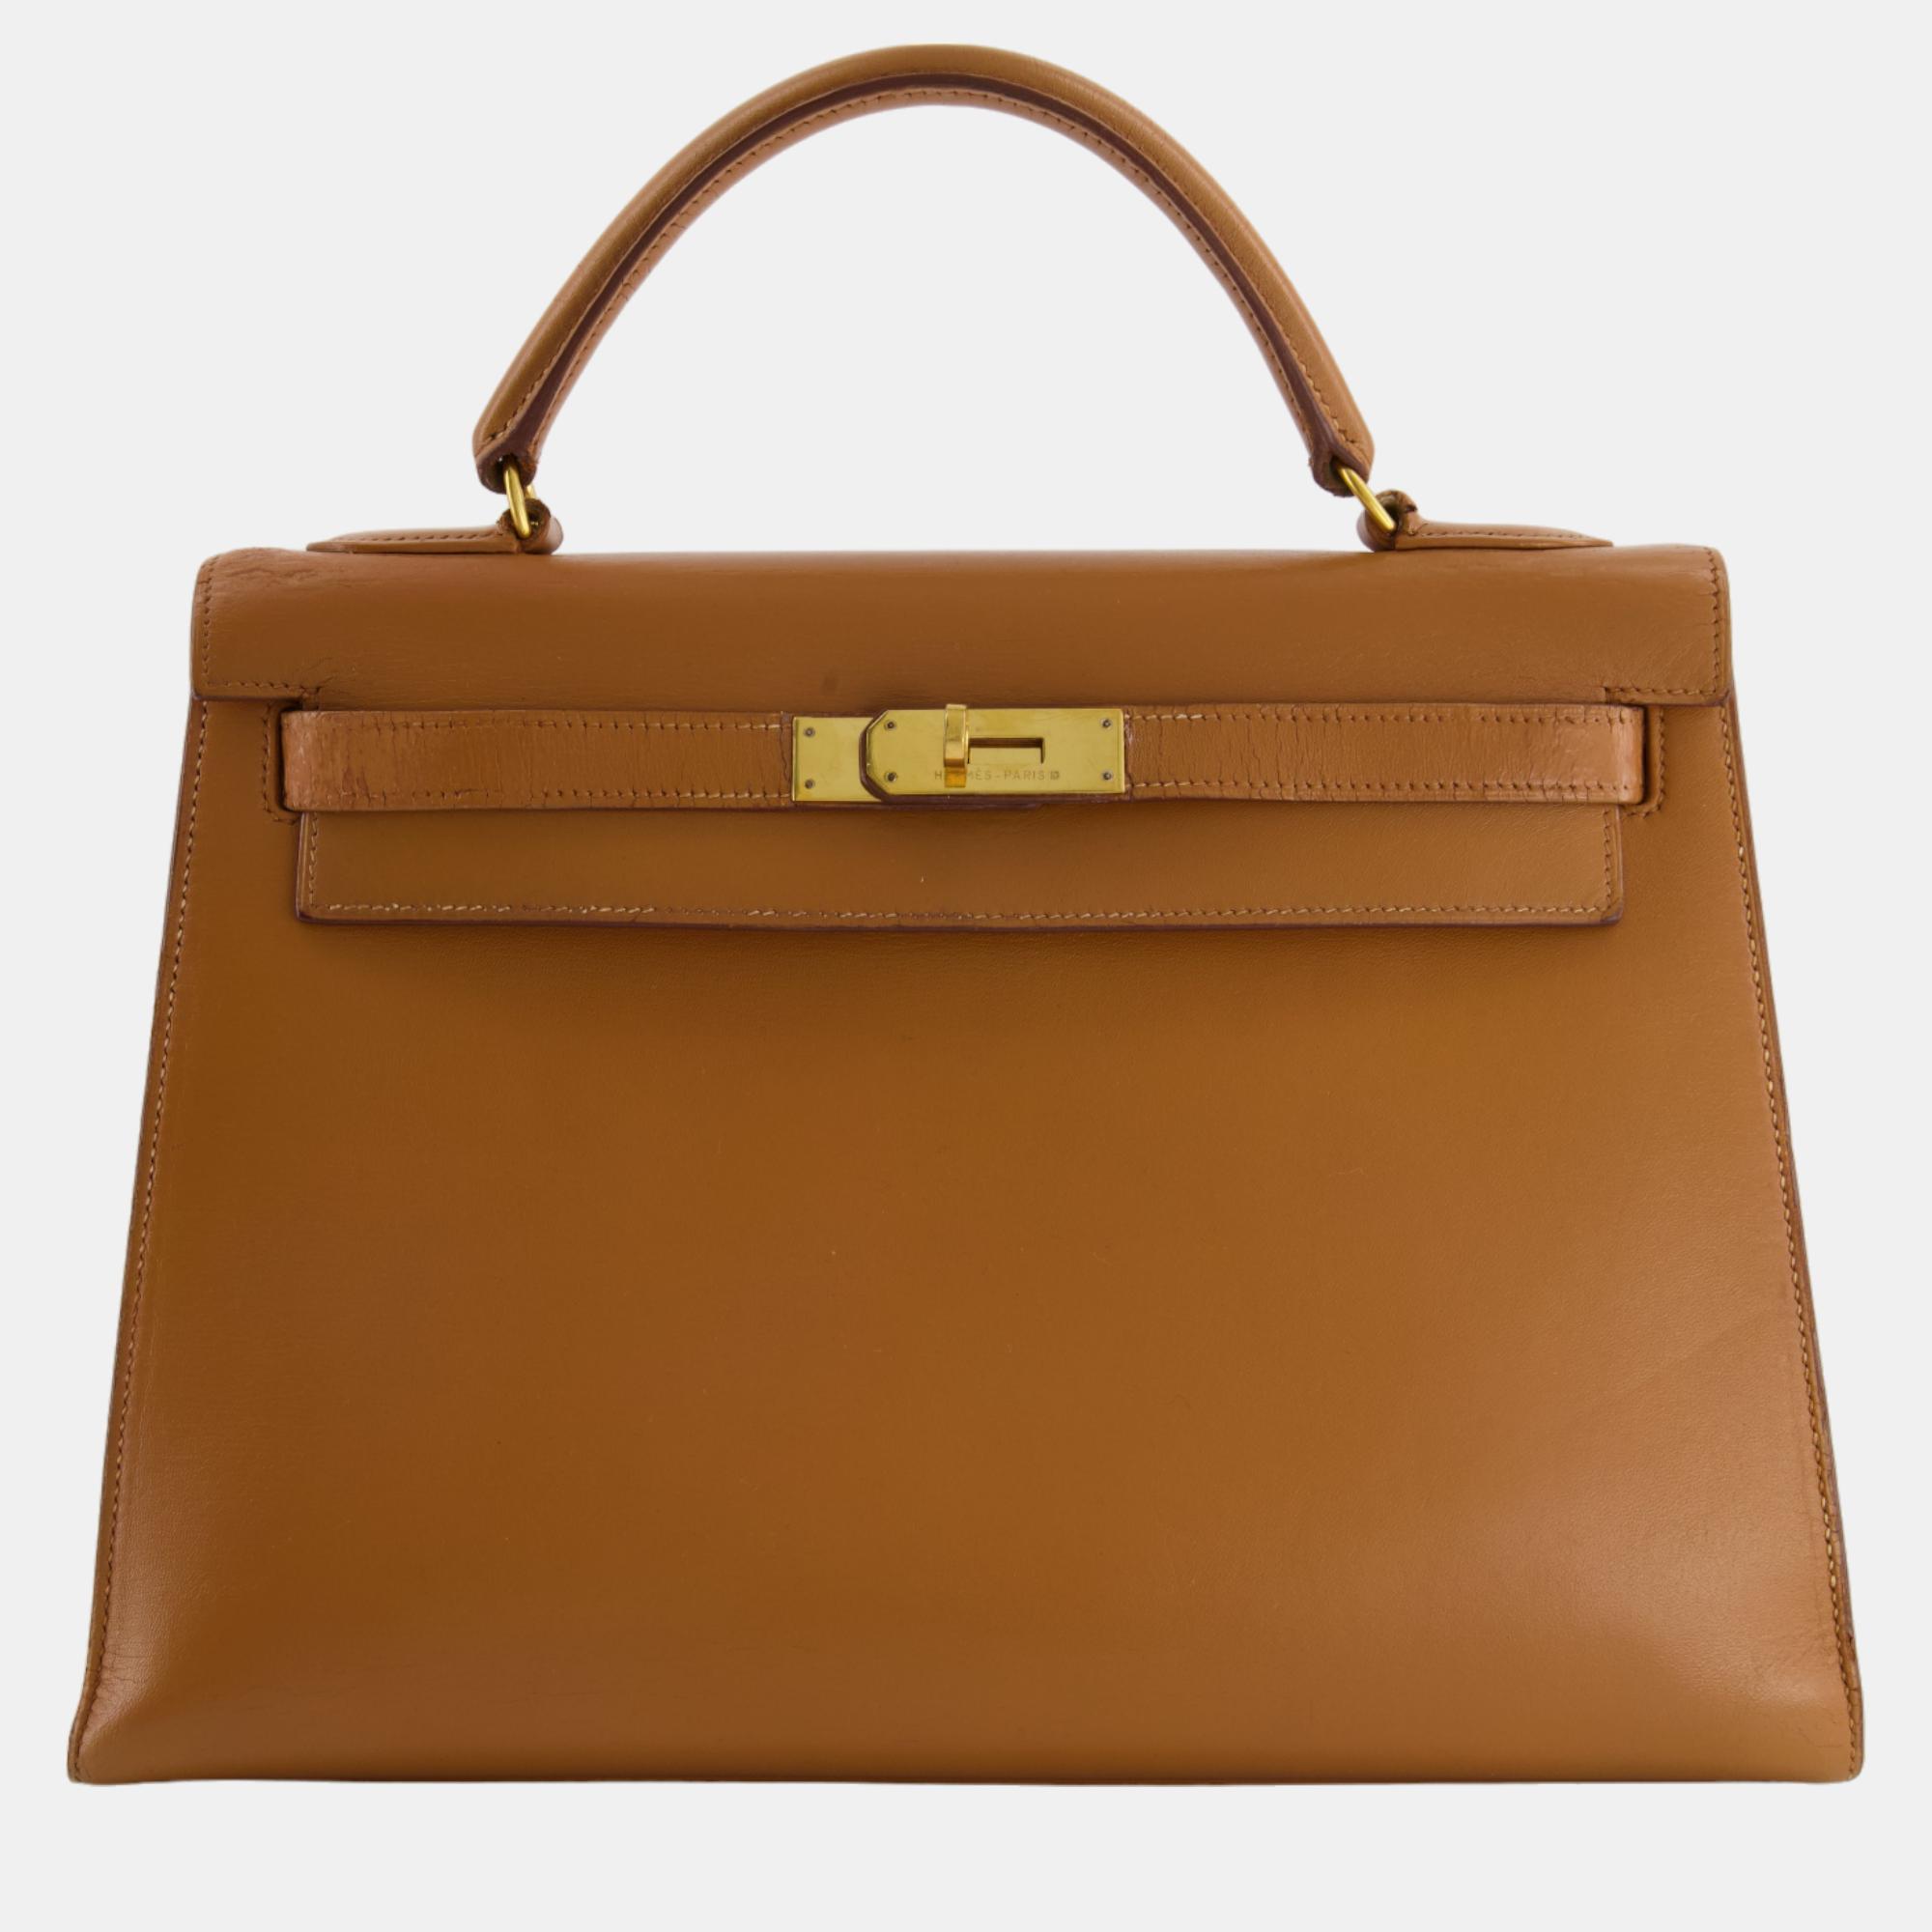 Hermes Vintage Kelly Bag 32cm In Gold Box Leather And Gold Hardware